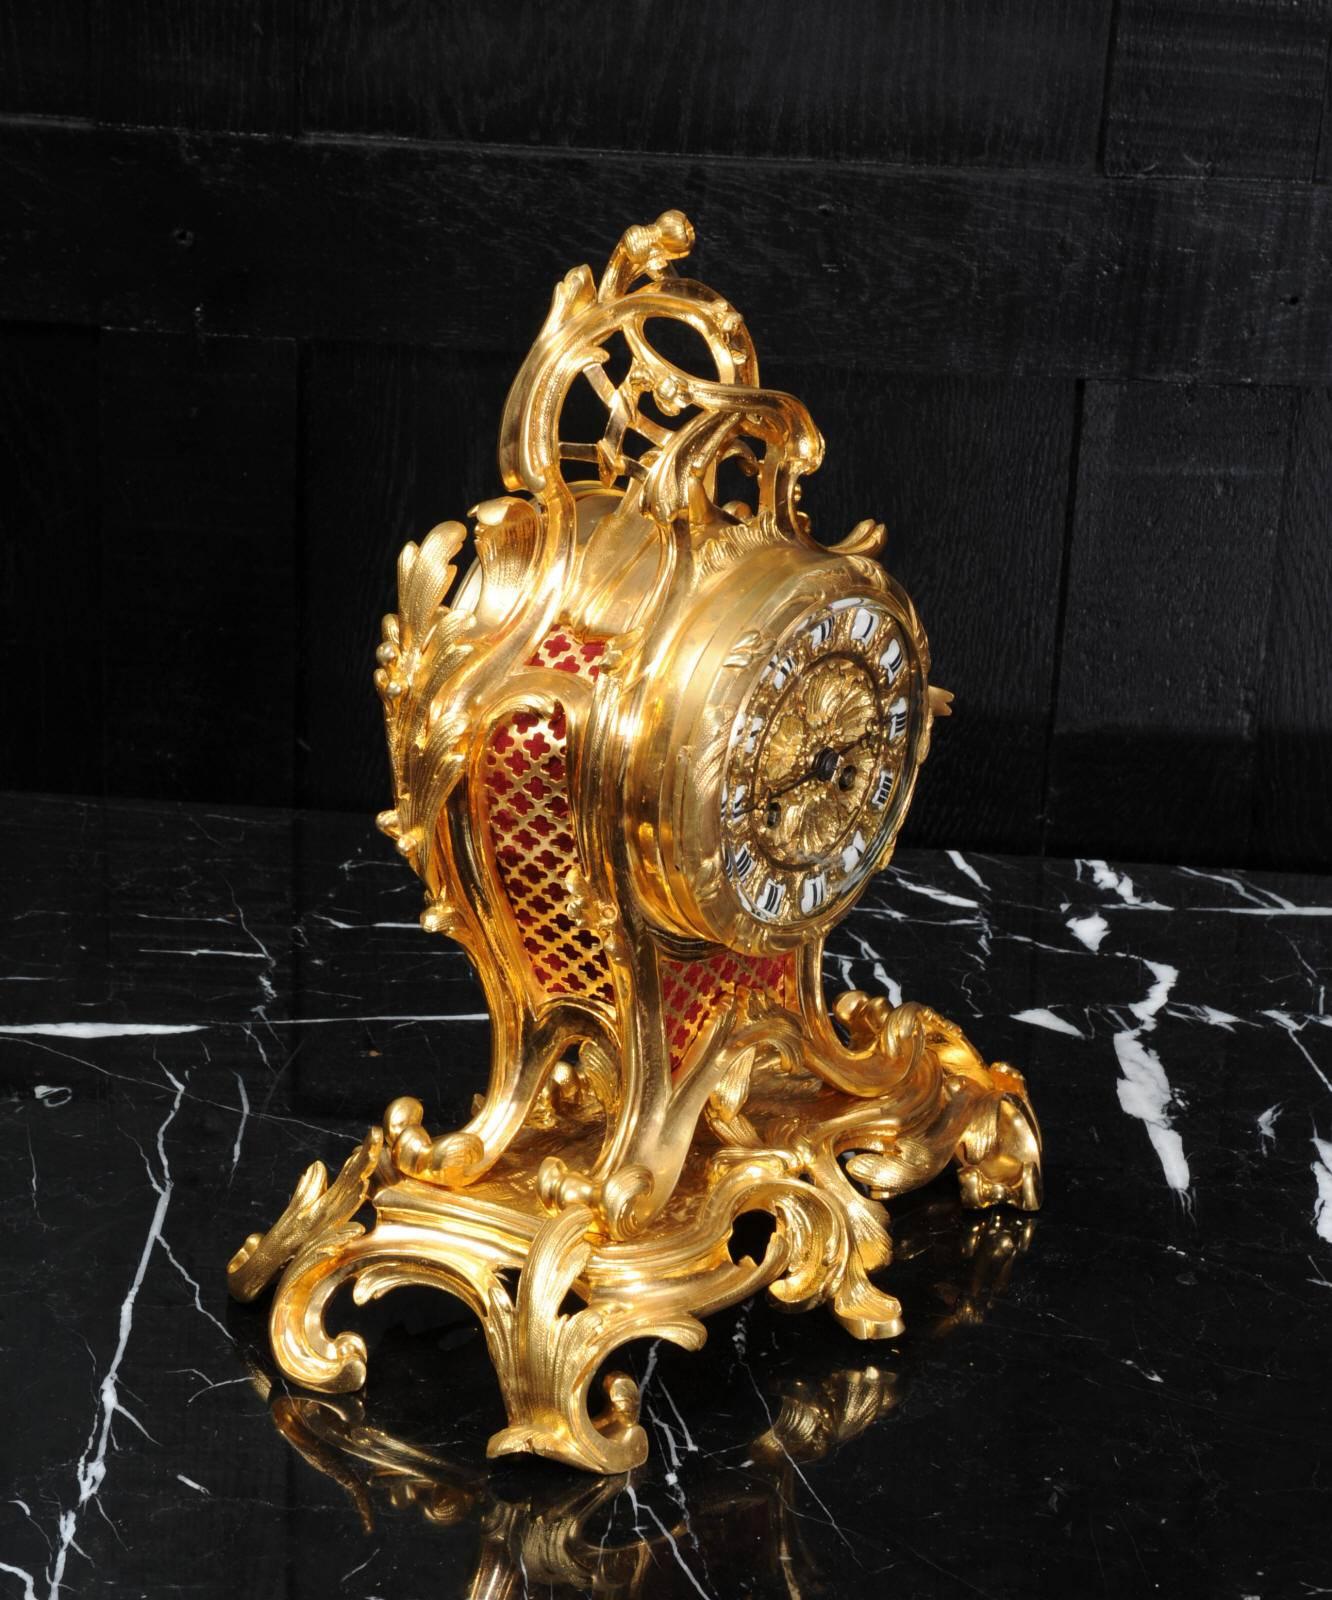 French Ormolu Rococo Table Clock by Charpentier Paris